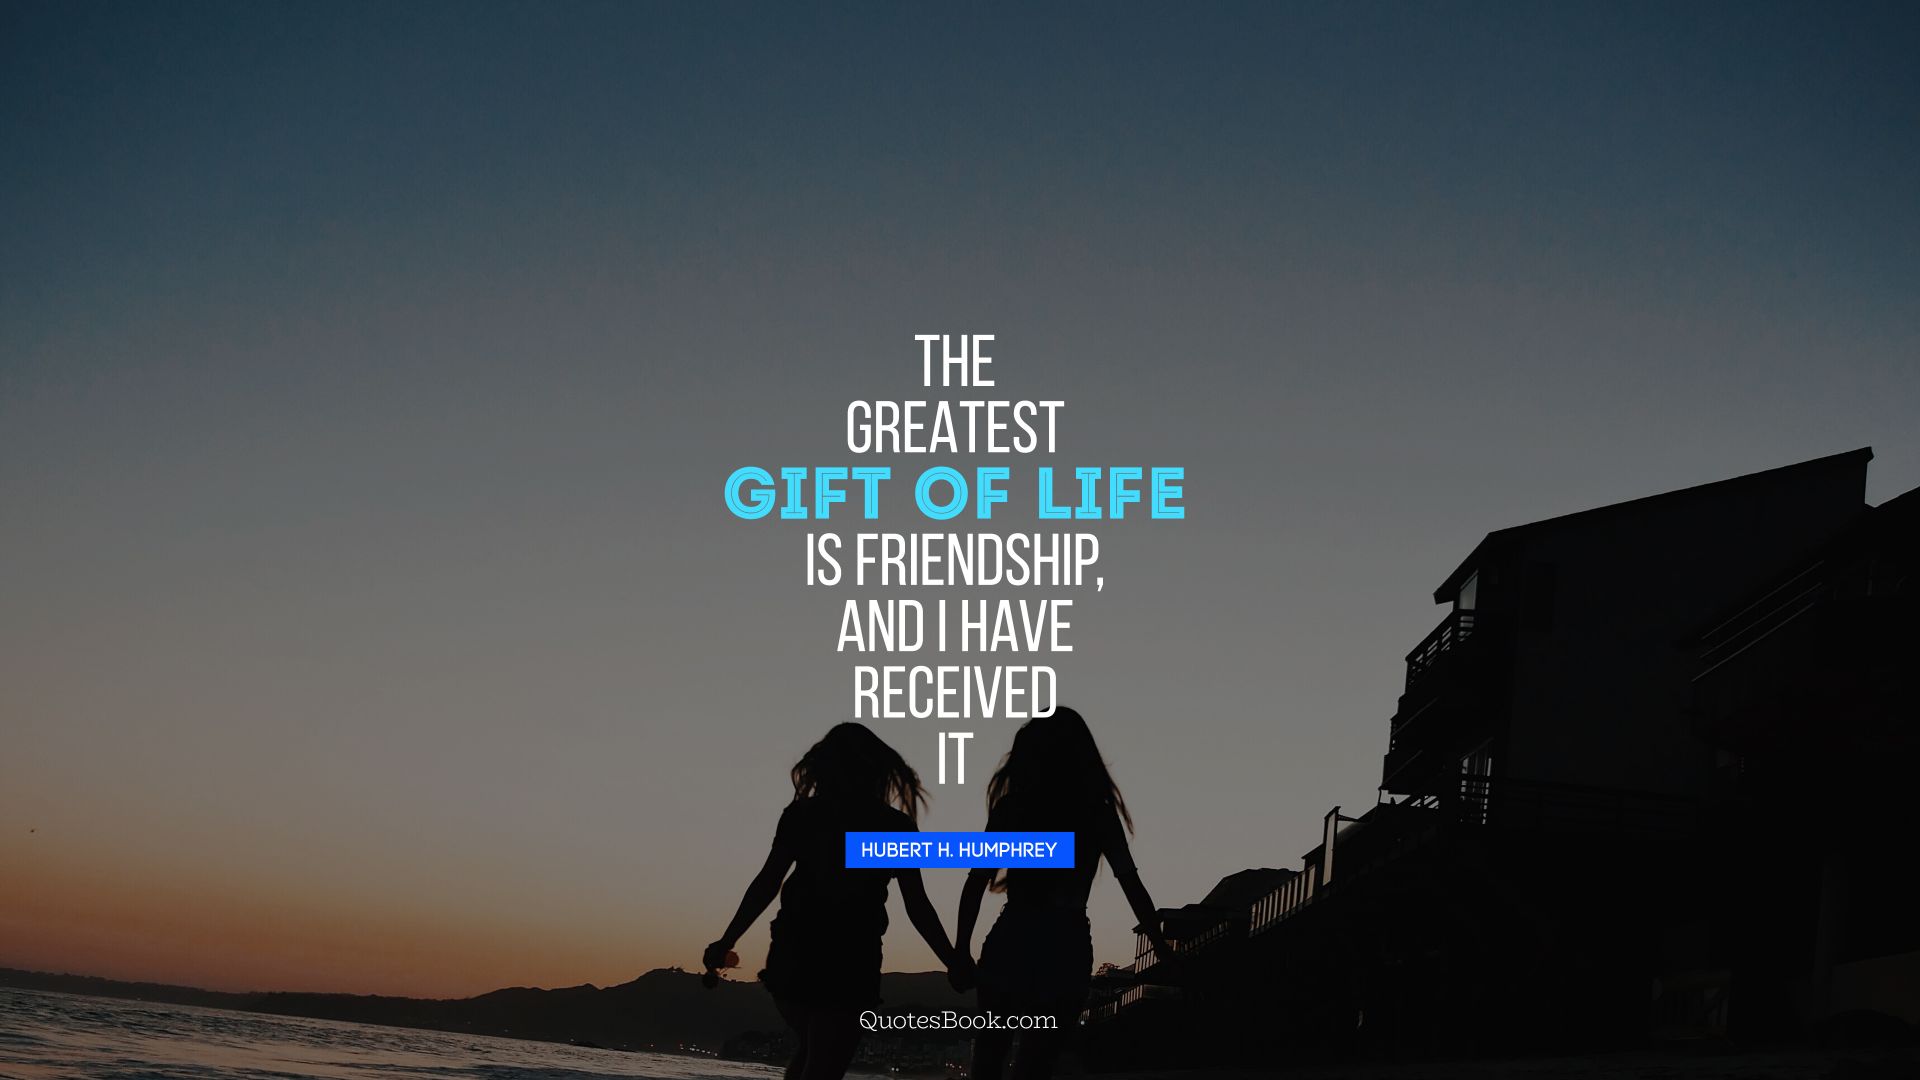 The greatest gift of life is friendship, and I have received it. - Quote by Hubert H. Humphrey